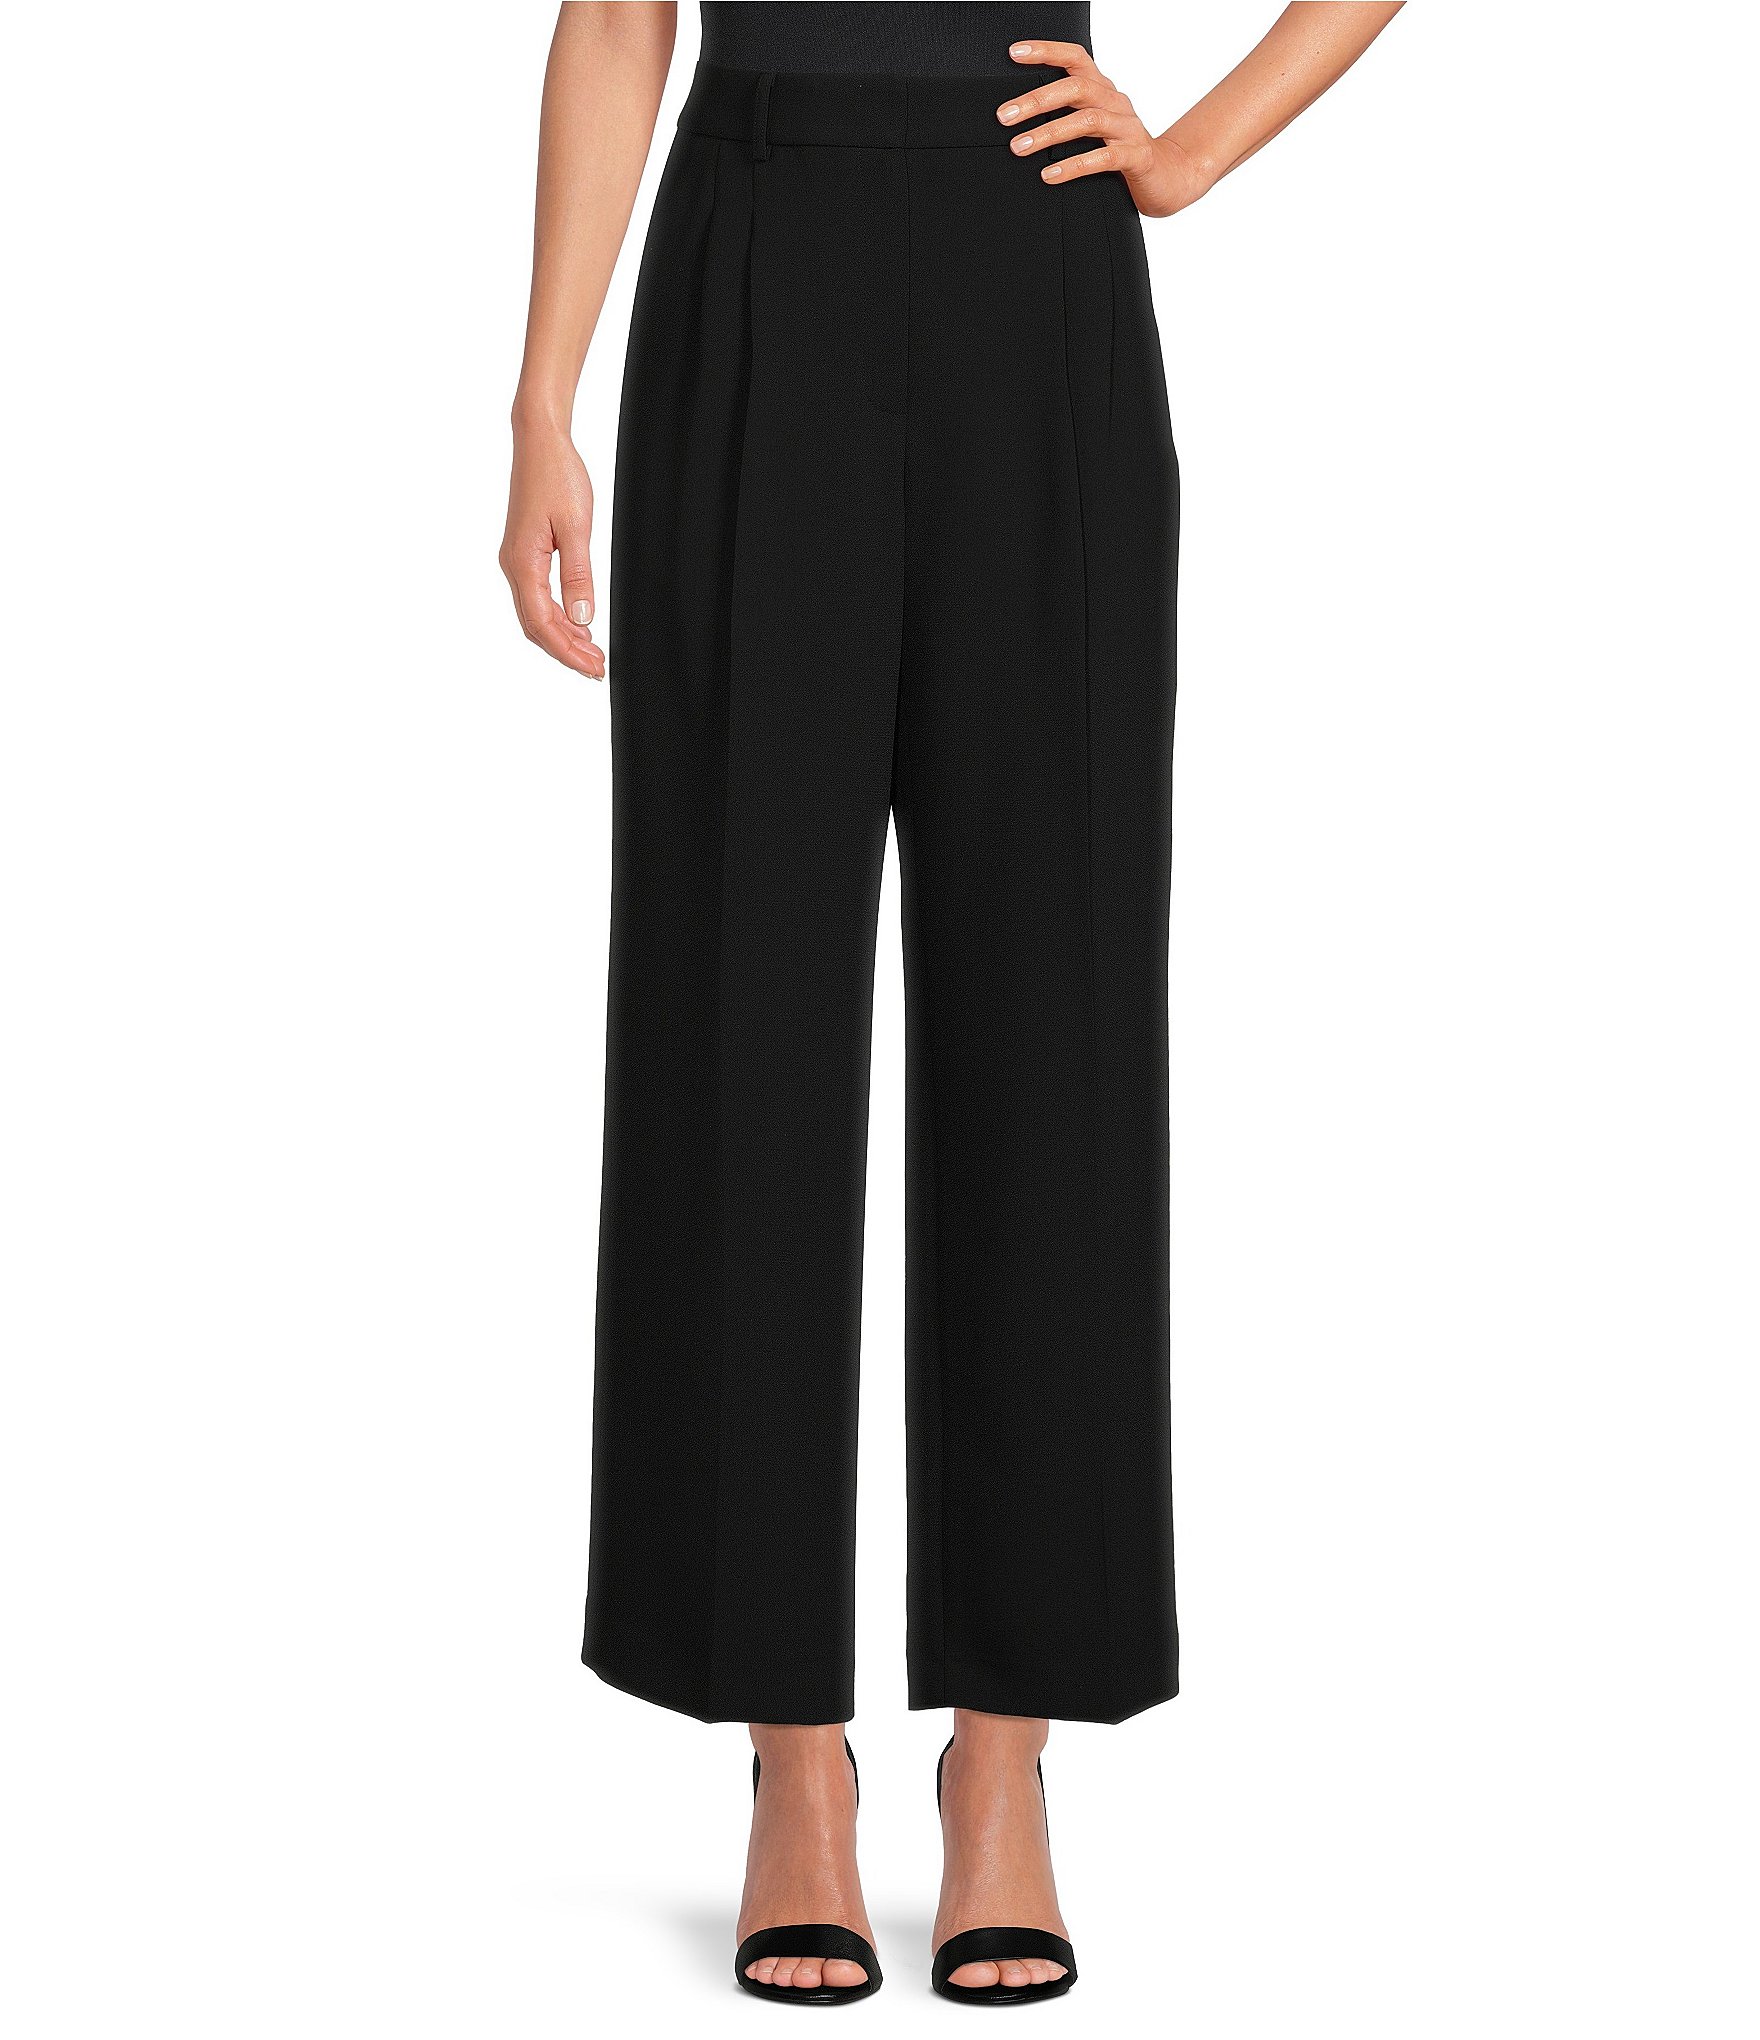 Fashion (Black)Harem Pants Women High Waist Mujer Pantalones Loose Workwear  Formal Trousers Casual Ankle-Length Fitness Dress Pants For Woman DOU @  Best Price Online